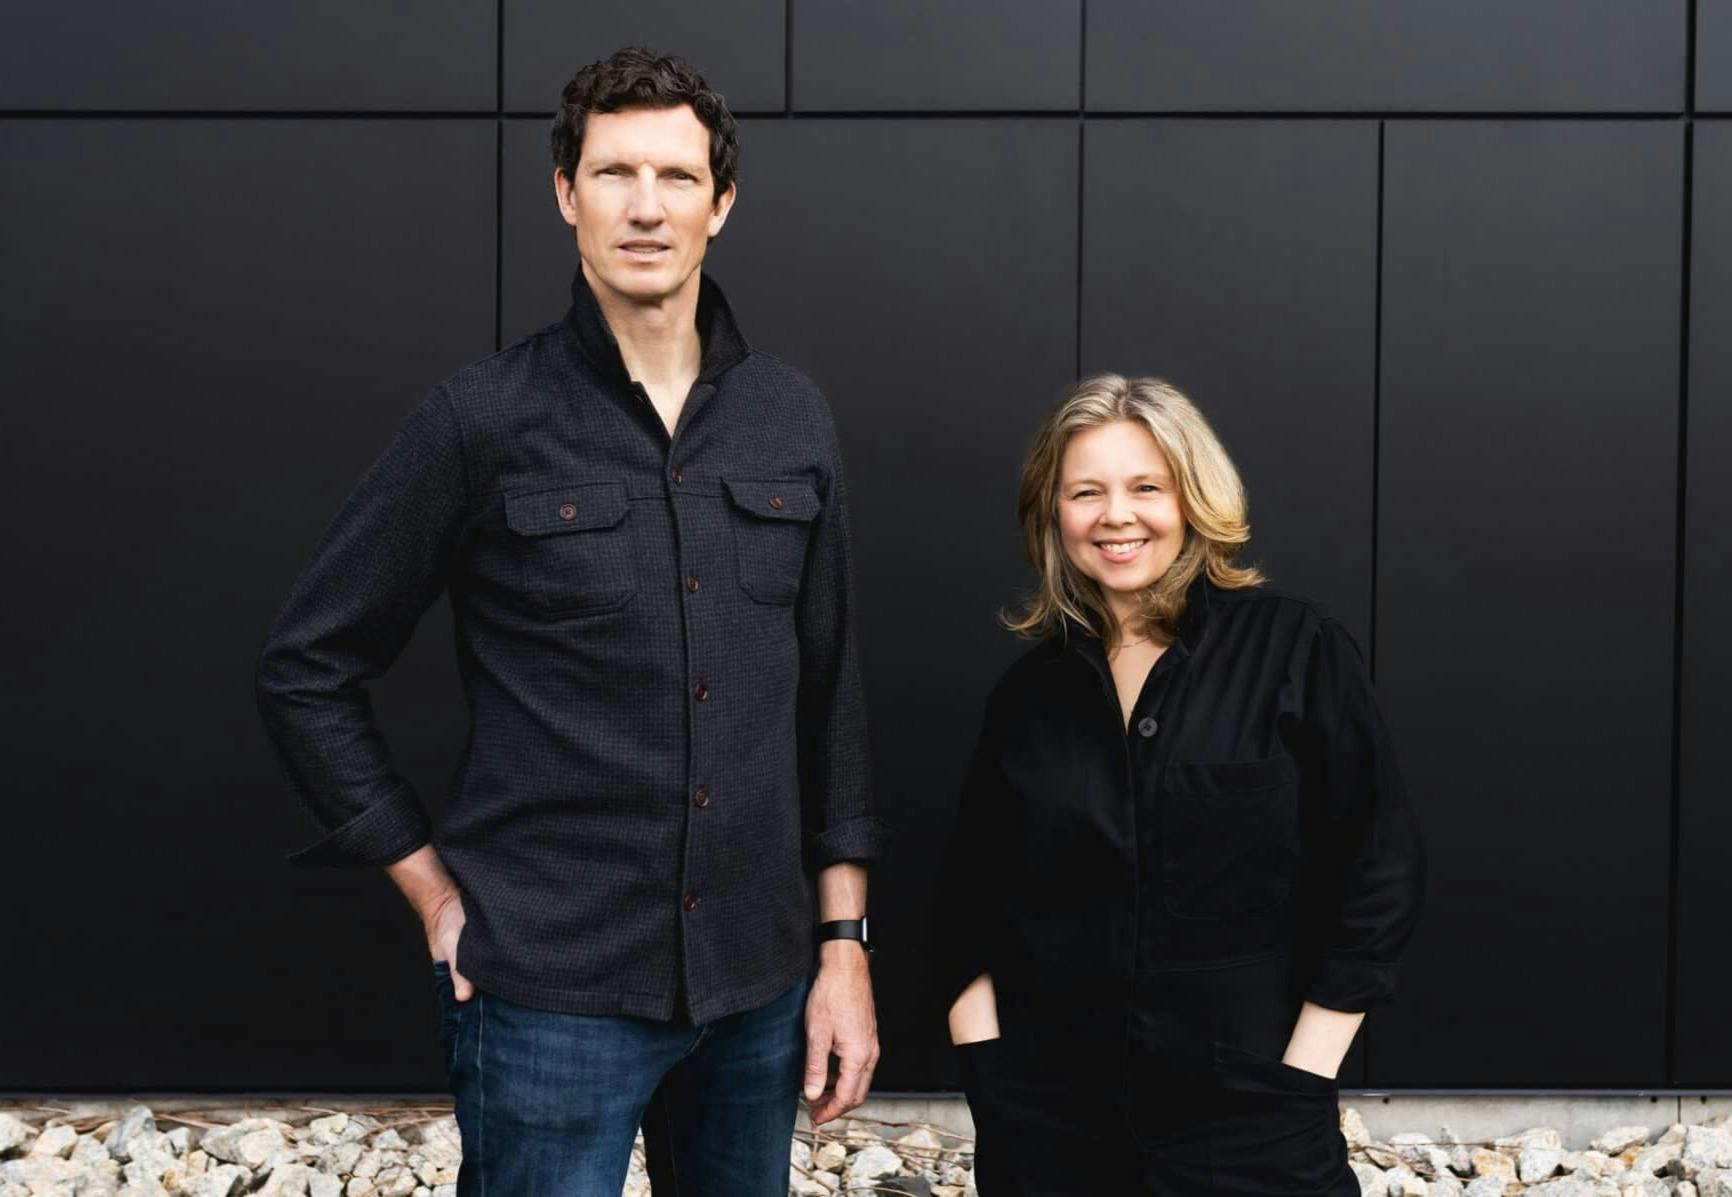 Kyle Shaw and Christine Oreskovich, the two co-founders of The Coast 